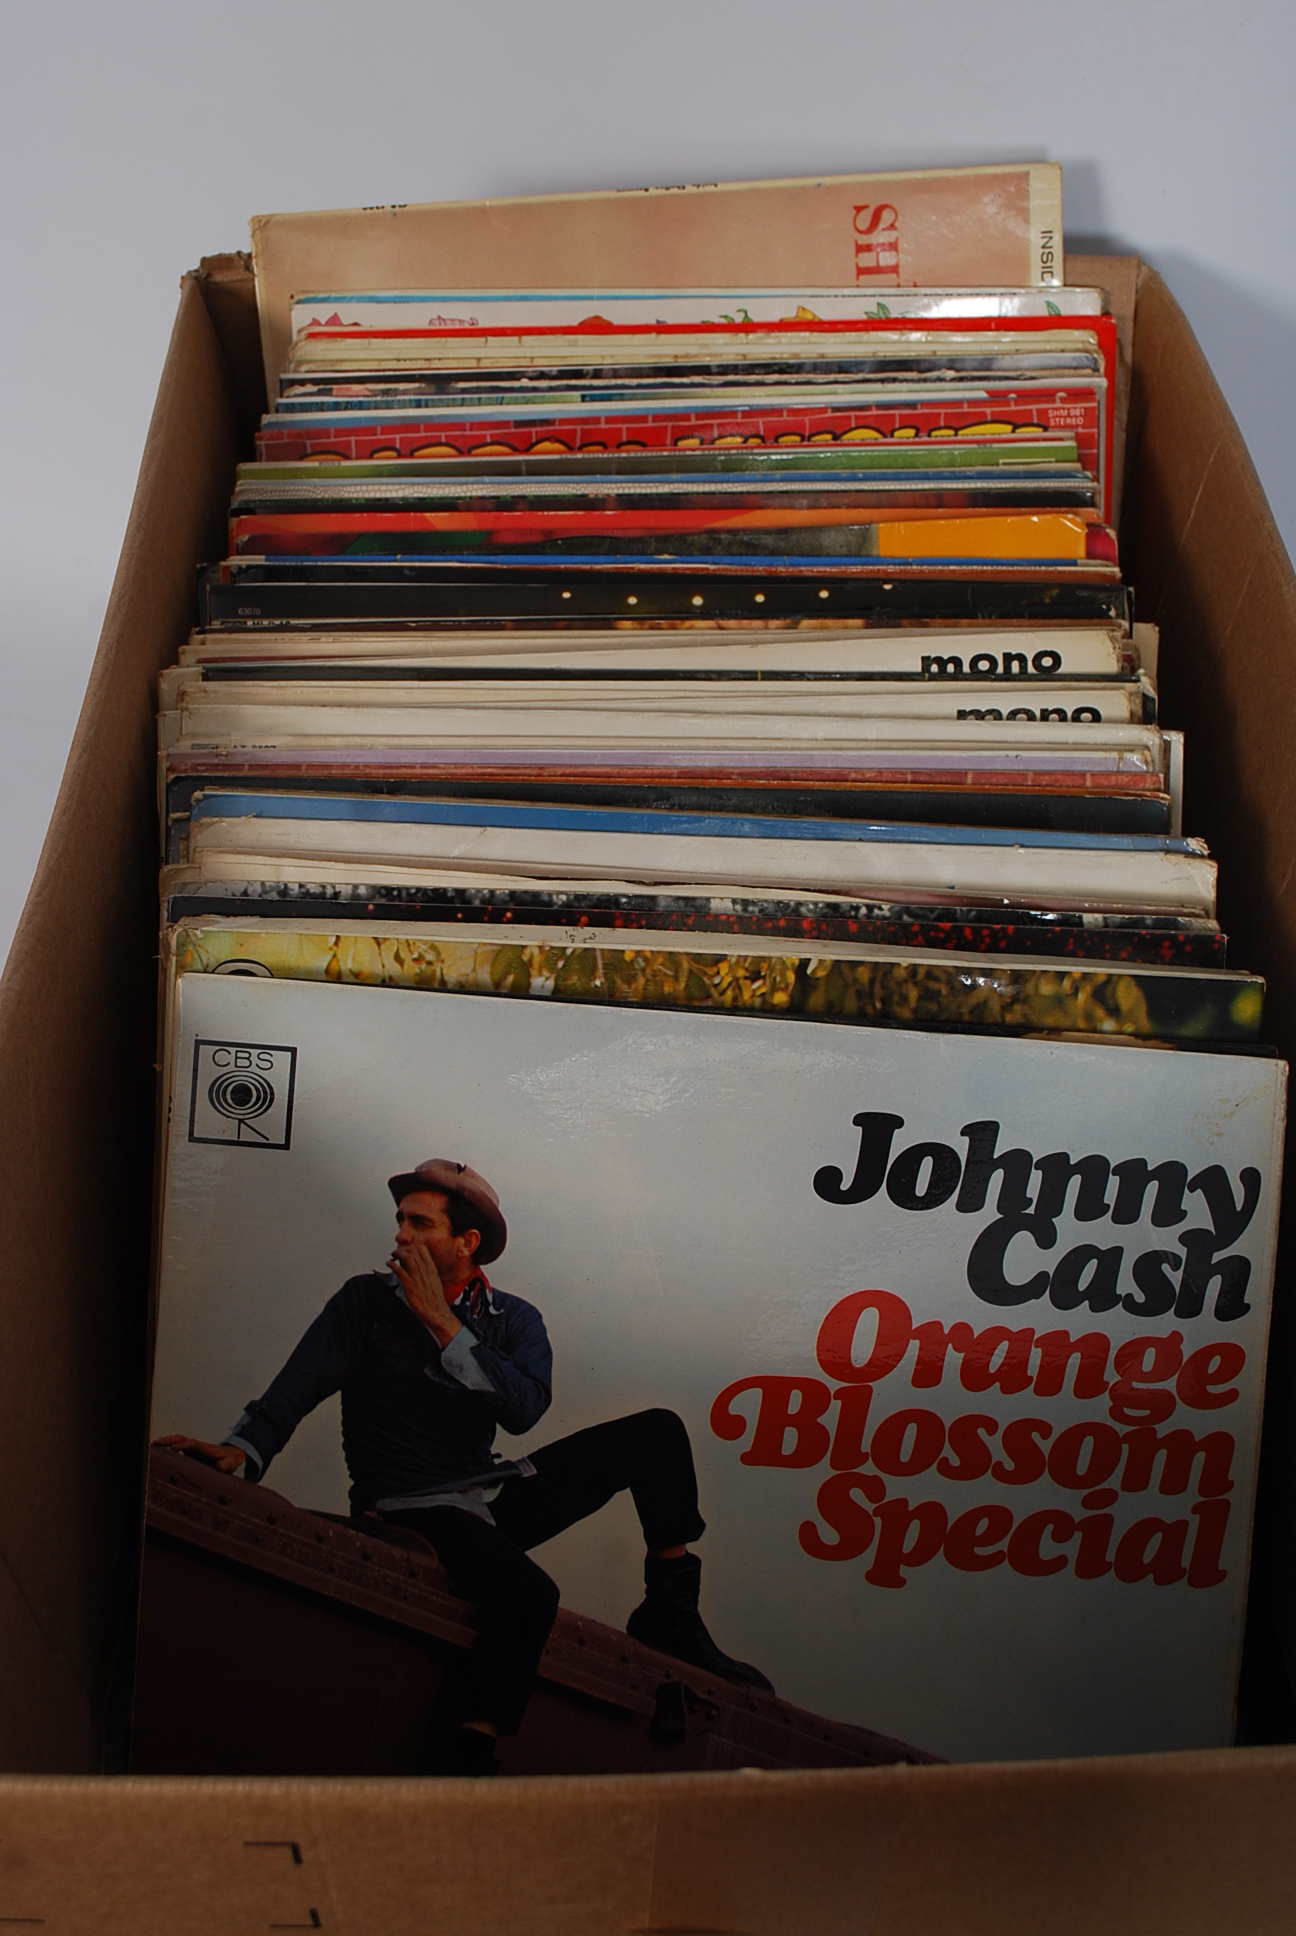 A quantity of albums to include Scottish folk, Irish folk / Rebel Johnny Cash. A large amount of the